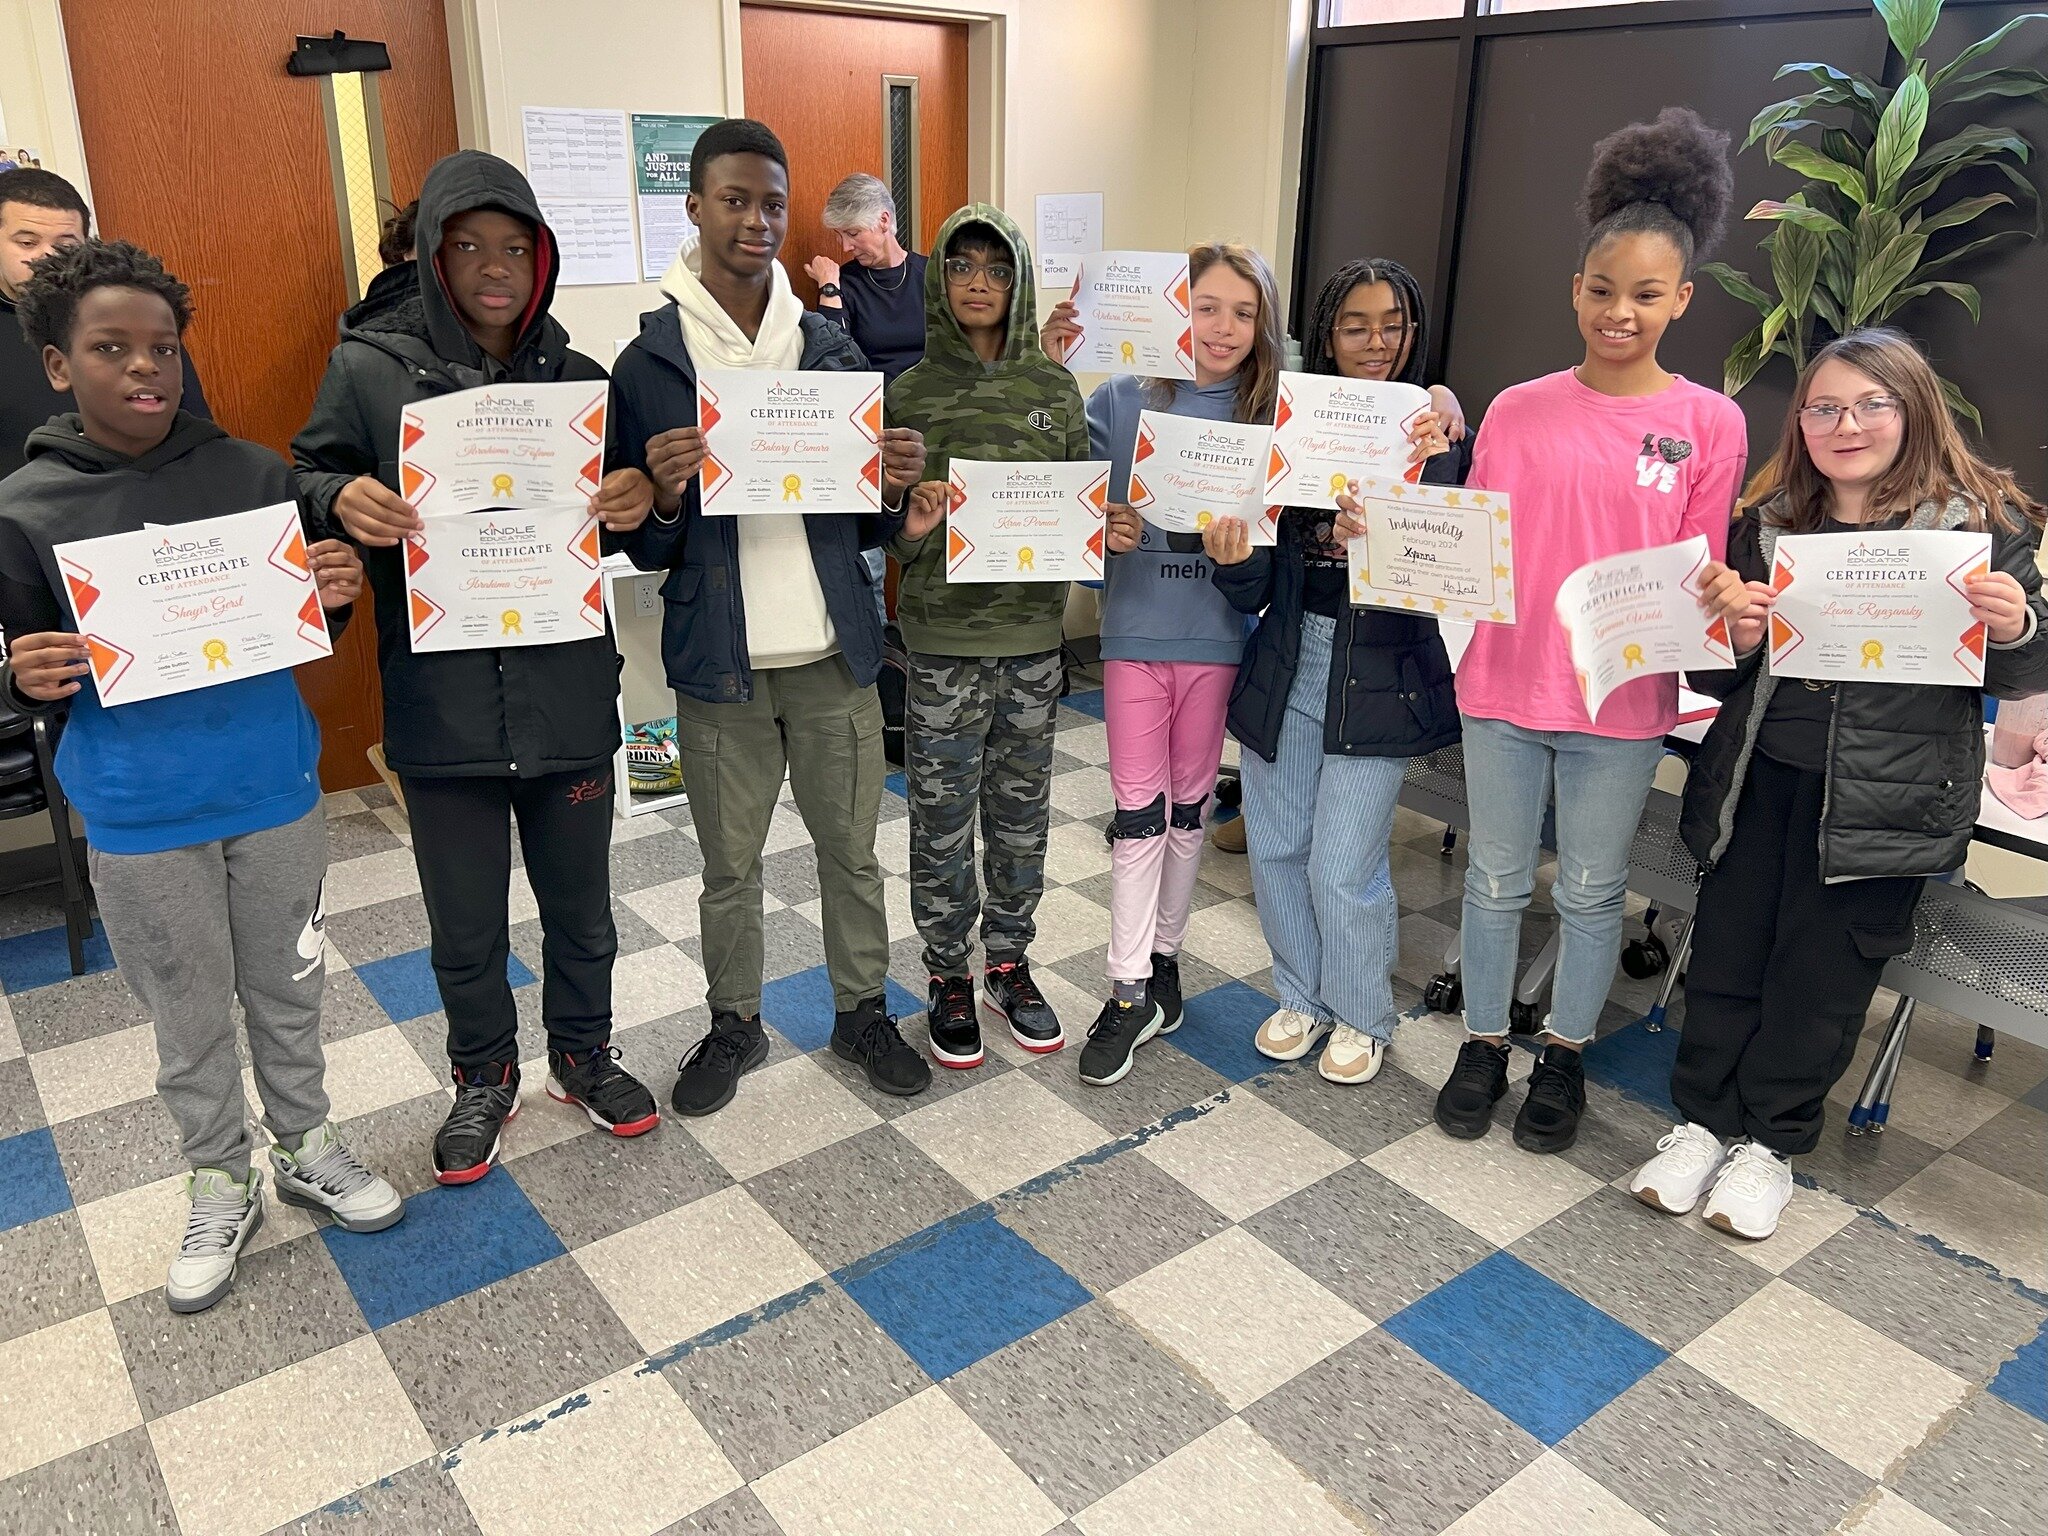 Congratulations to the Kindle students who were recognized at our January Community Meetings! These students had perfect attendance or exemplified Kindle's values of purpose, individuality, and equitable community. Keep up the great work!

 #JerseyCi